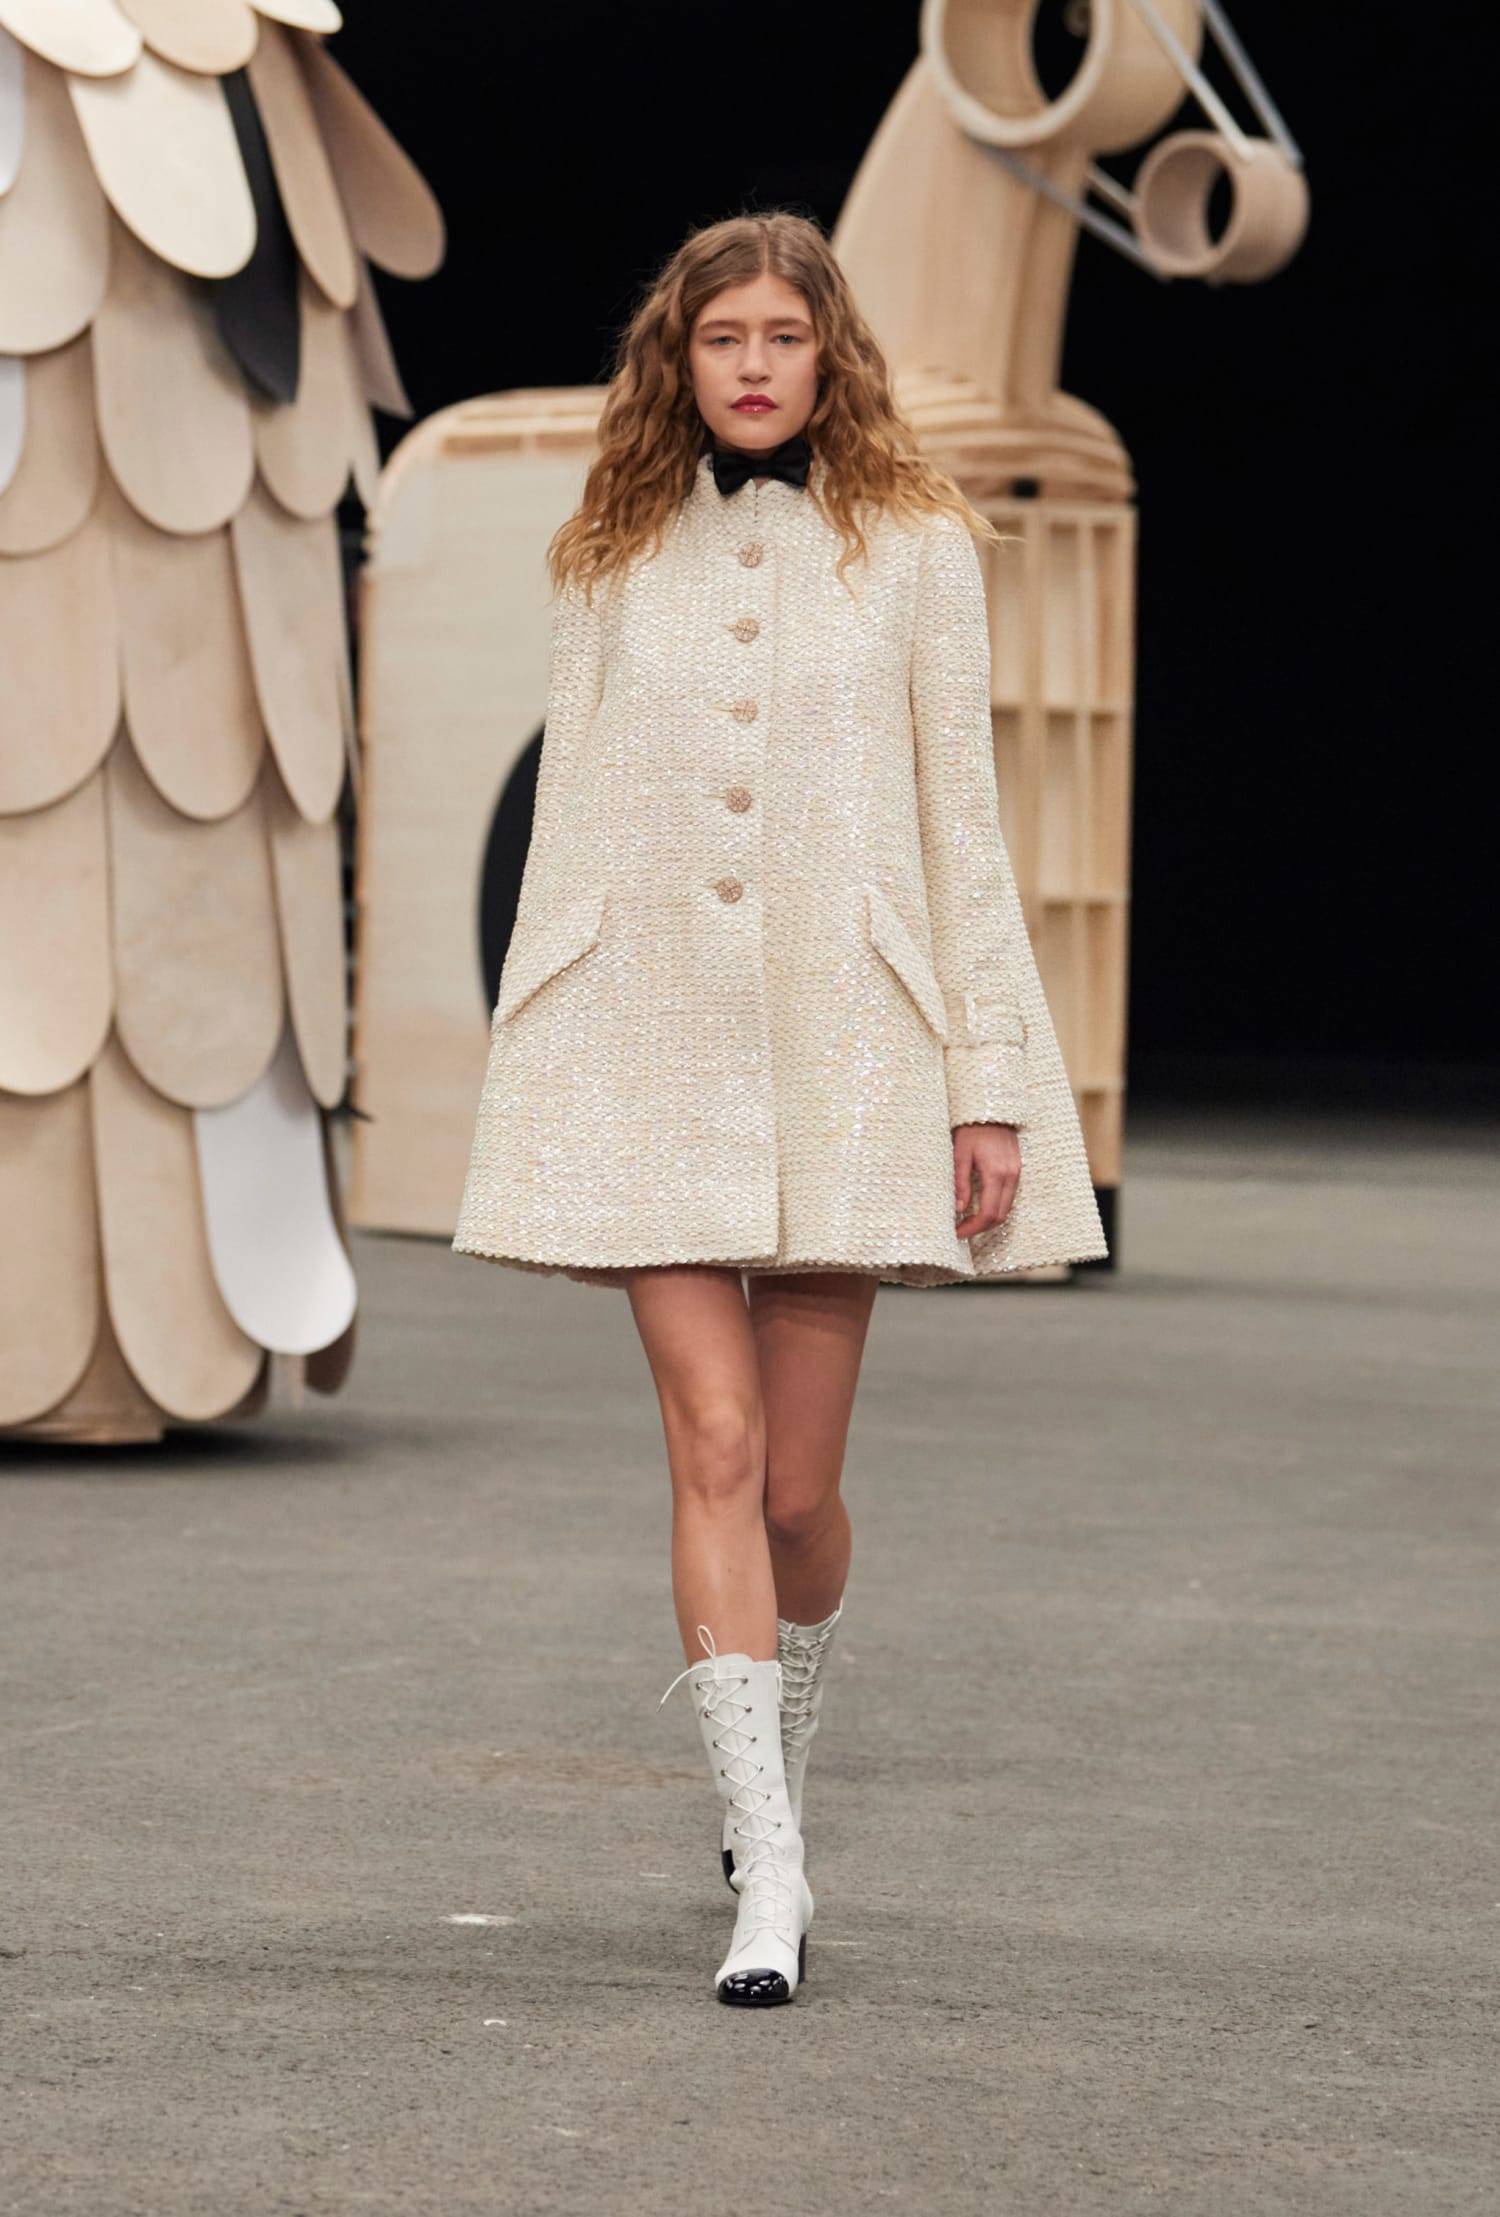  Chanel haute couture Spring-Summer 2023 show